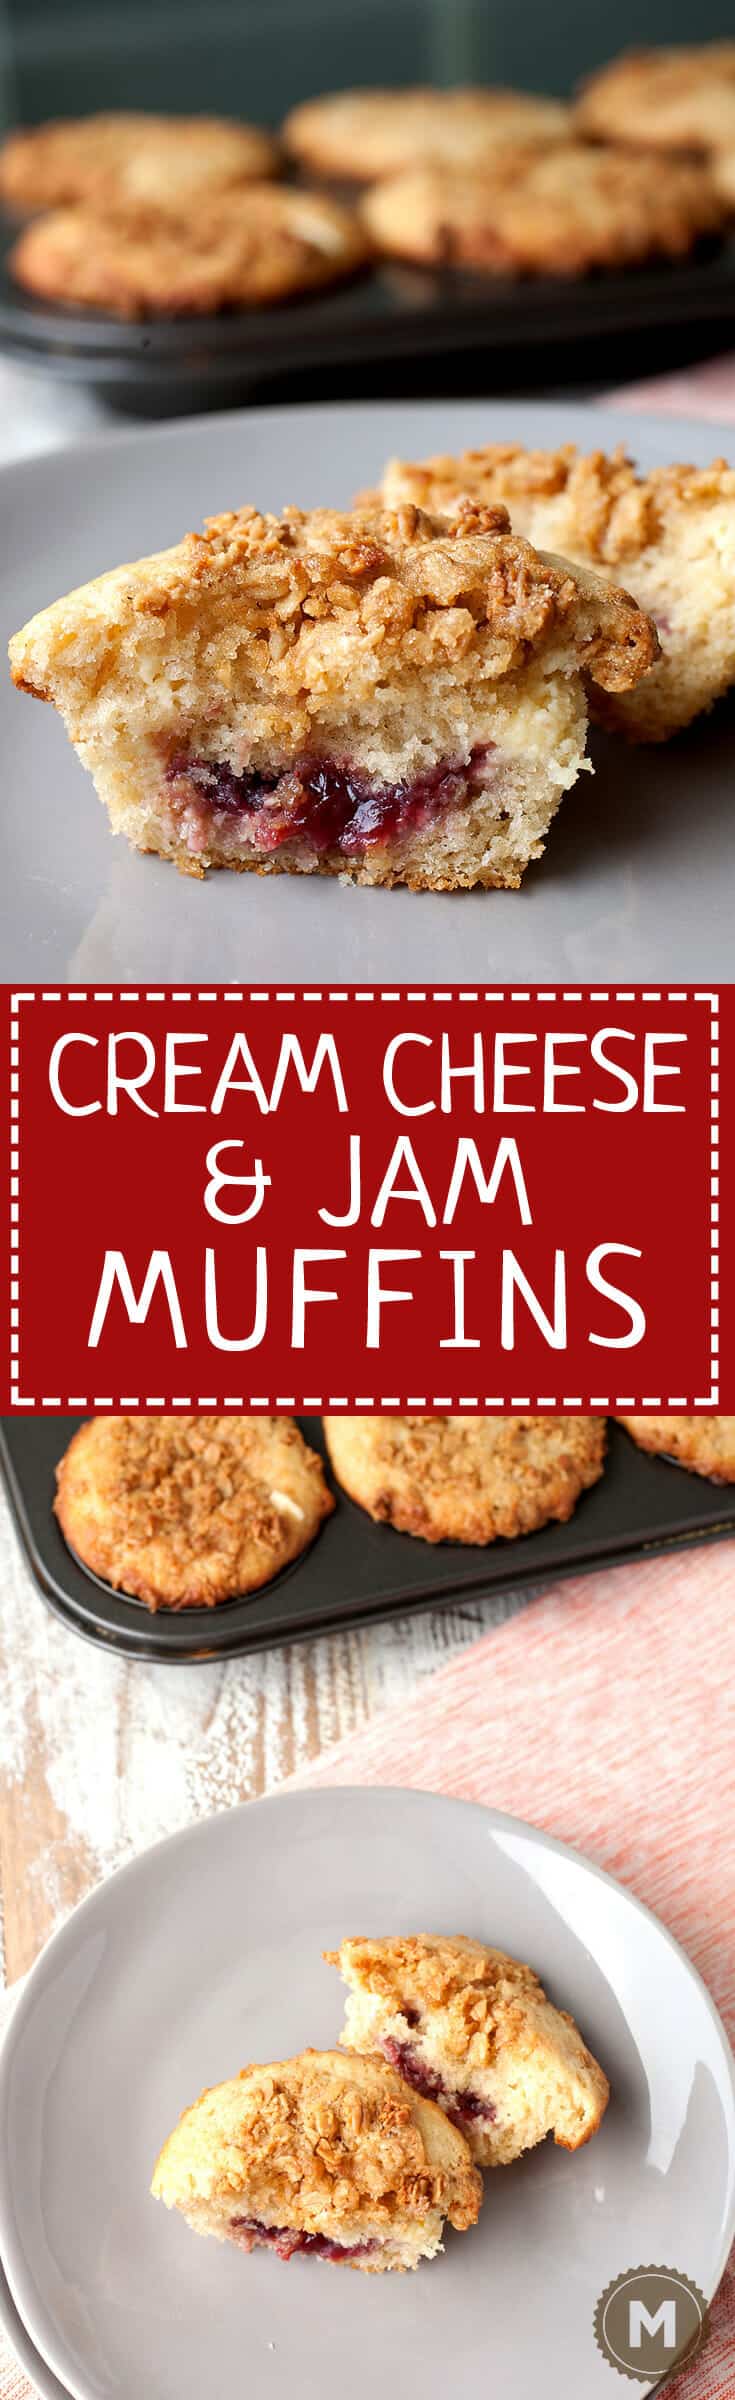 Cream Cheese and Jam Muffins: After many attempts, this is the way to stuff a muffin with just enough cream cheese and fruit jam. The finished muffin is sweet, tangy, and crunchy on top thanks to some granola streusel. A huge success! | macheesmo.com